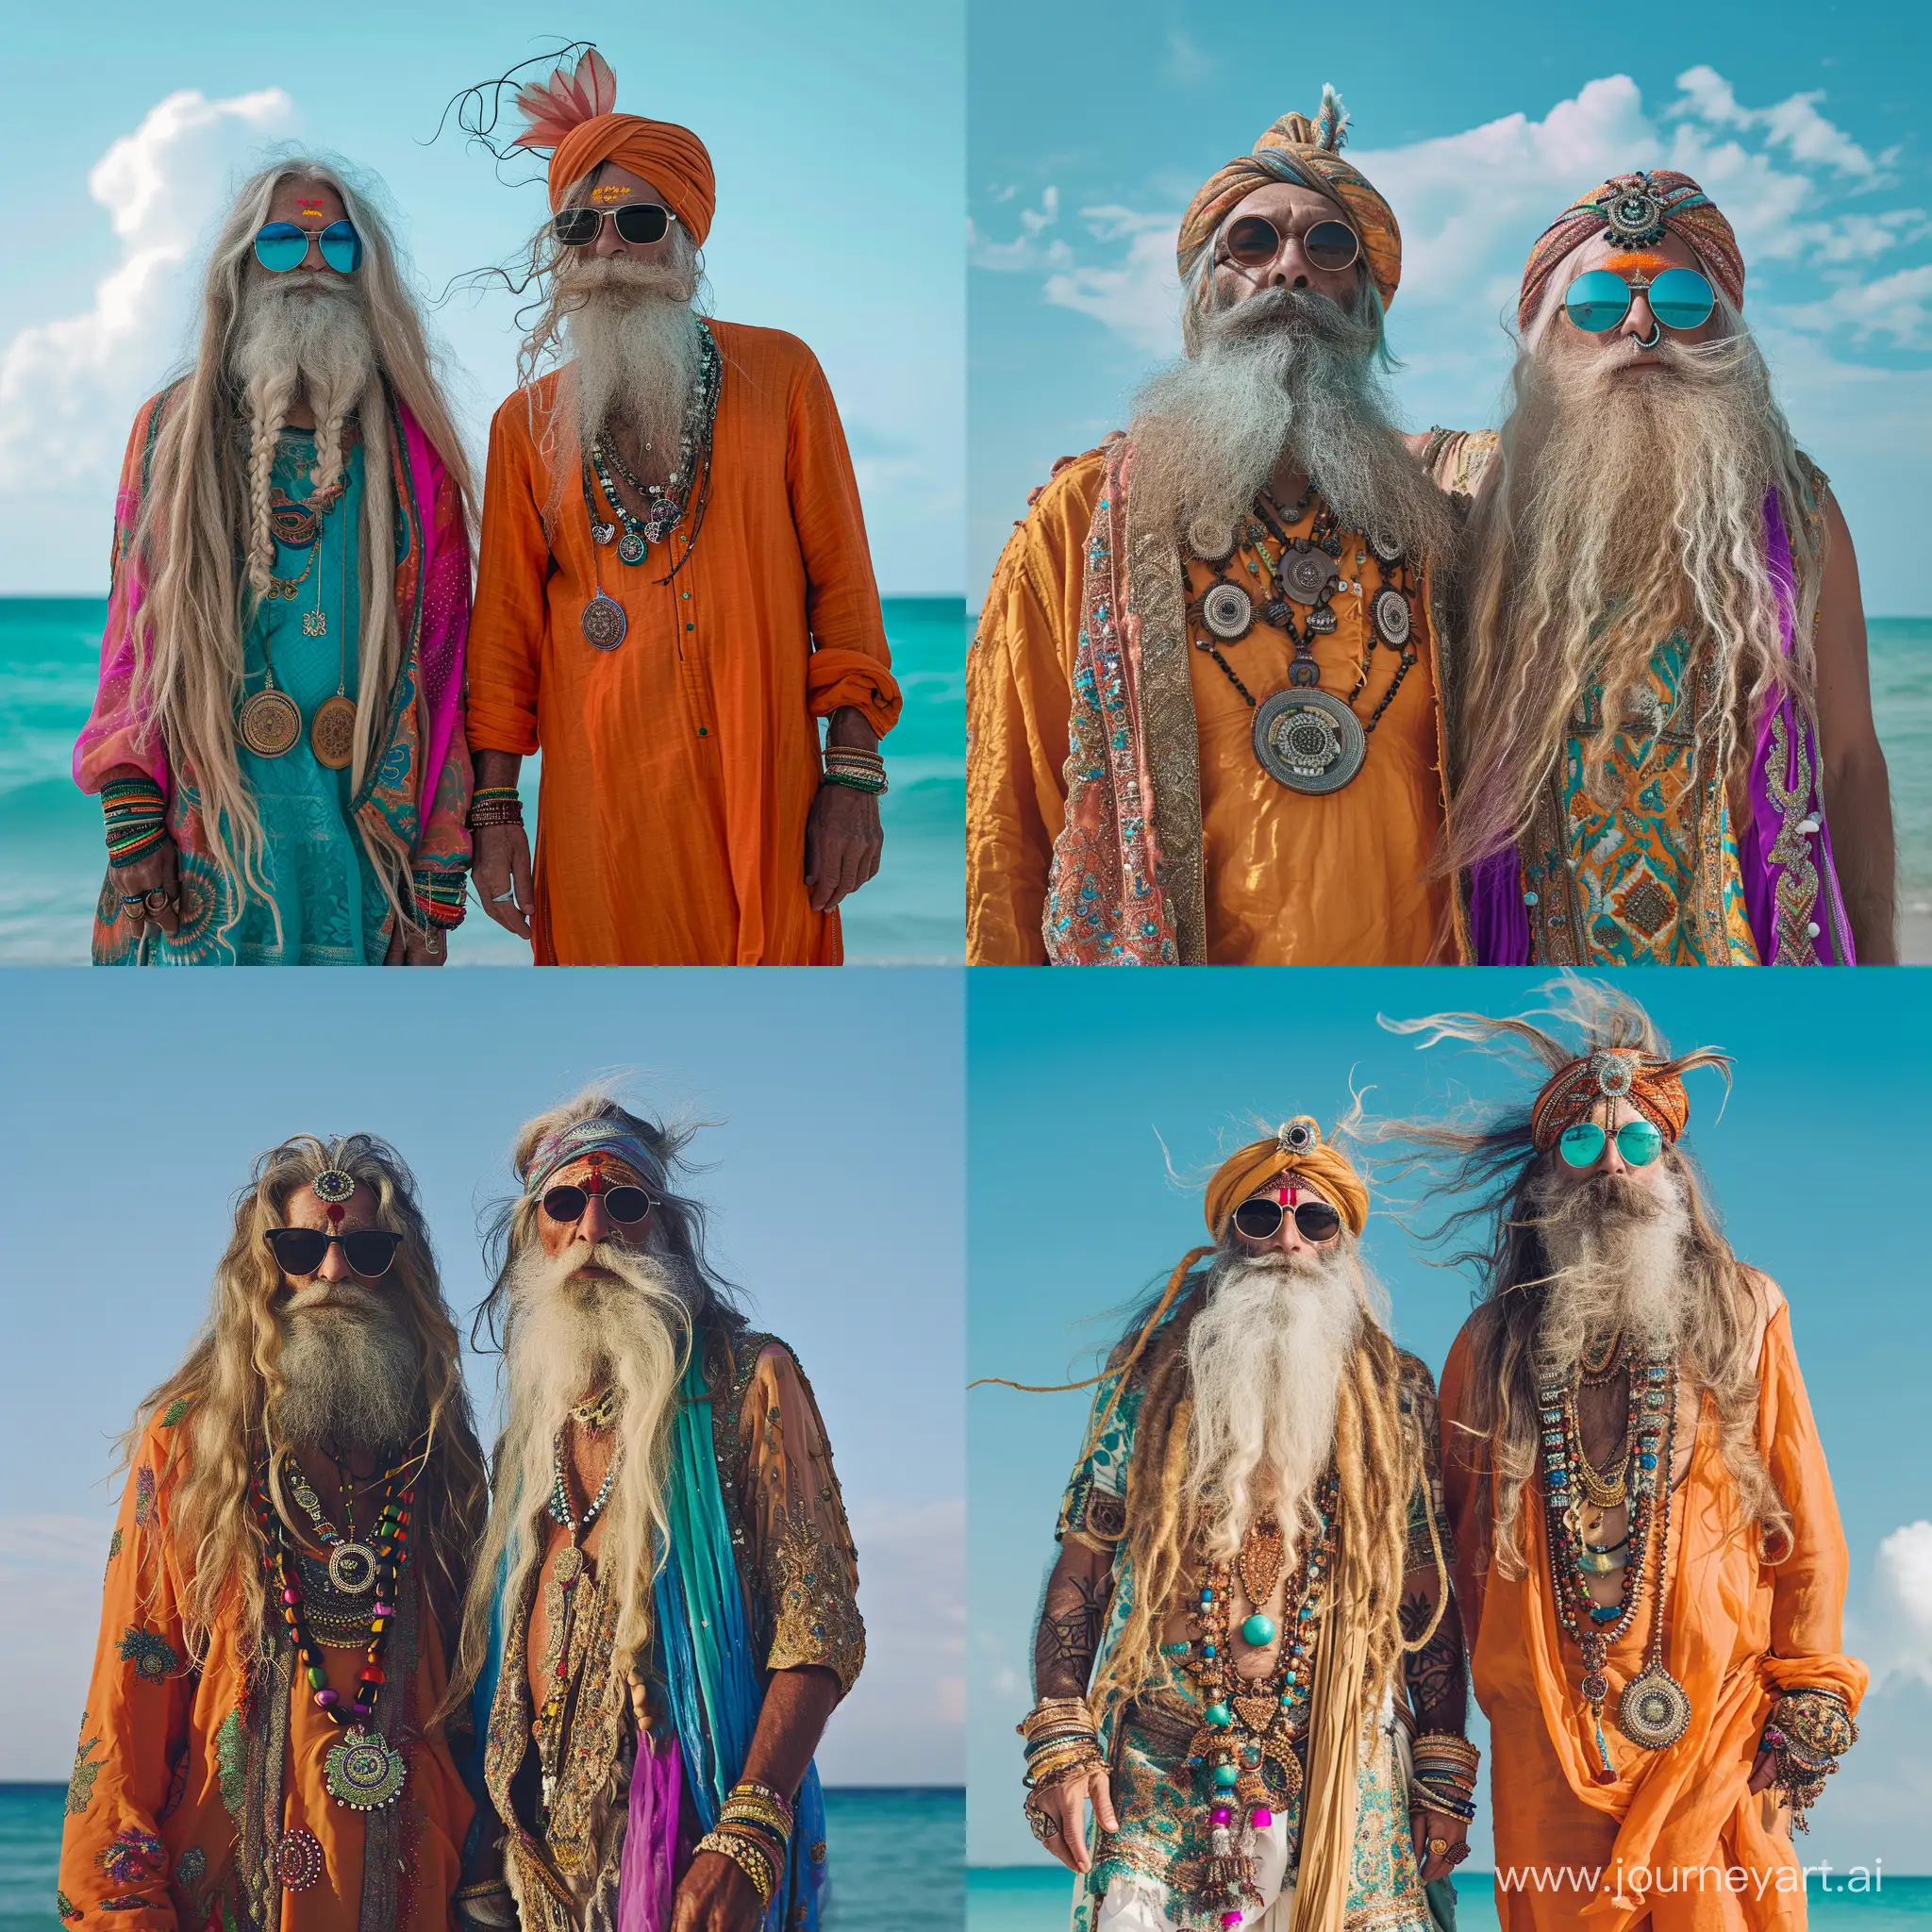 Colorful-Skinny-Hippies-in-Indian-Dress-at-Beach-with-Fuji-XT2